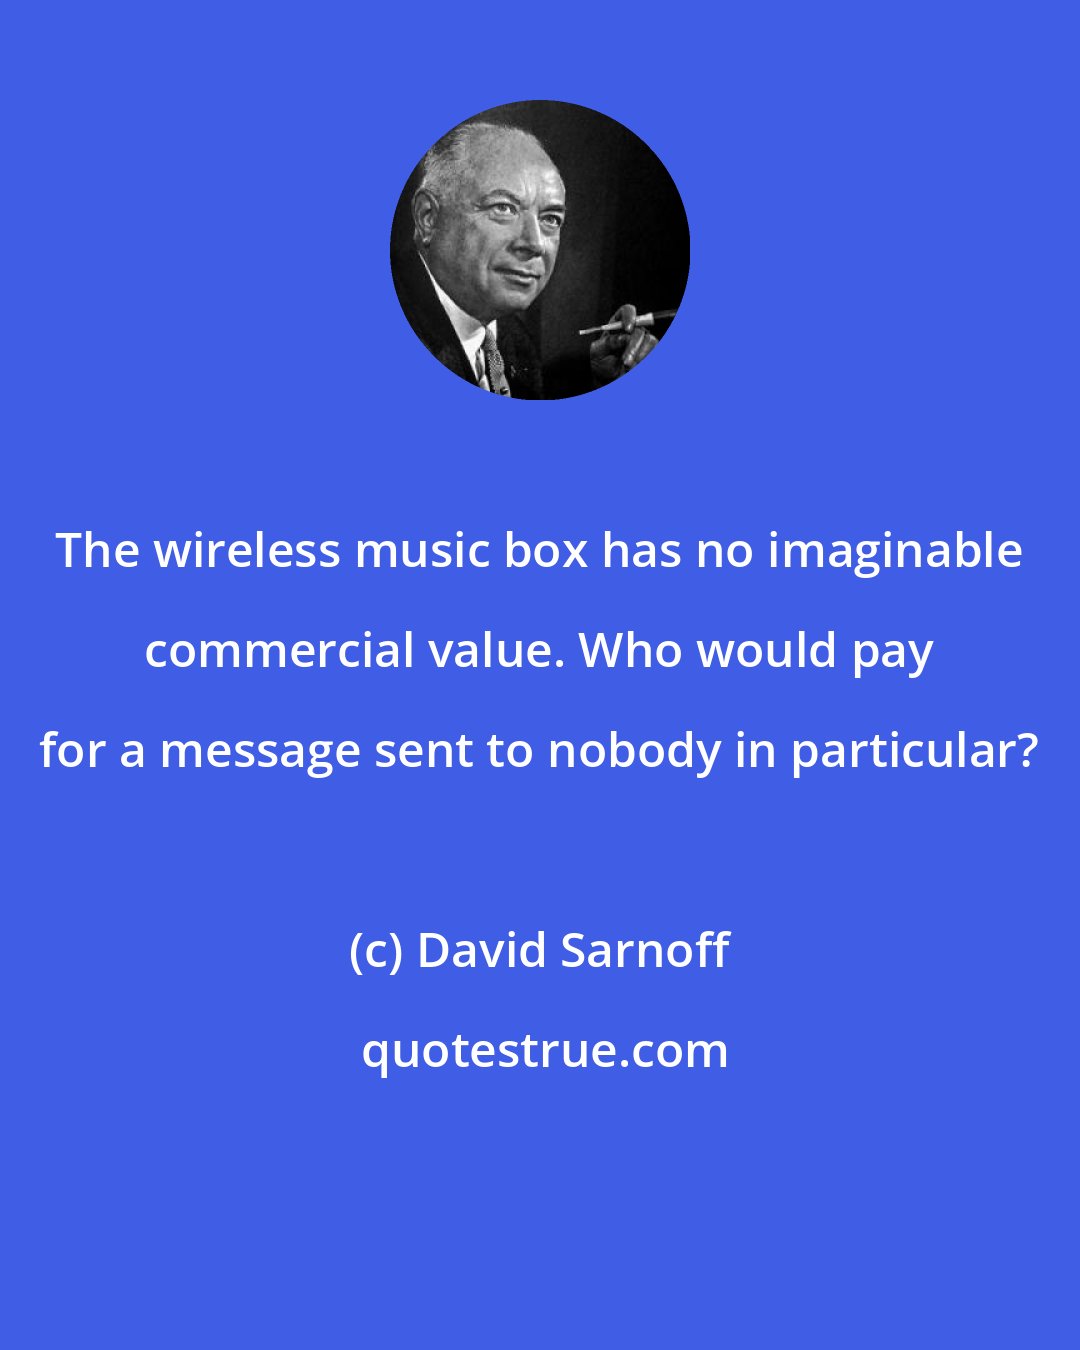 David Sarnoff: The wireless music box has no imaginable commercial value. Who would pay for a message sent to nobody in particular?